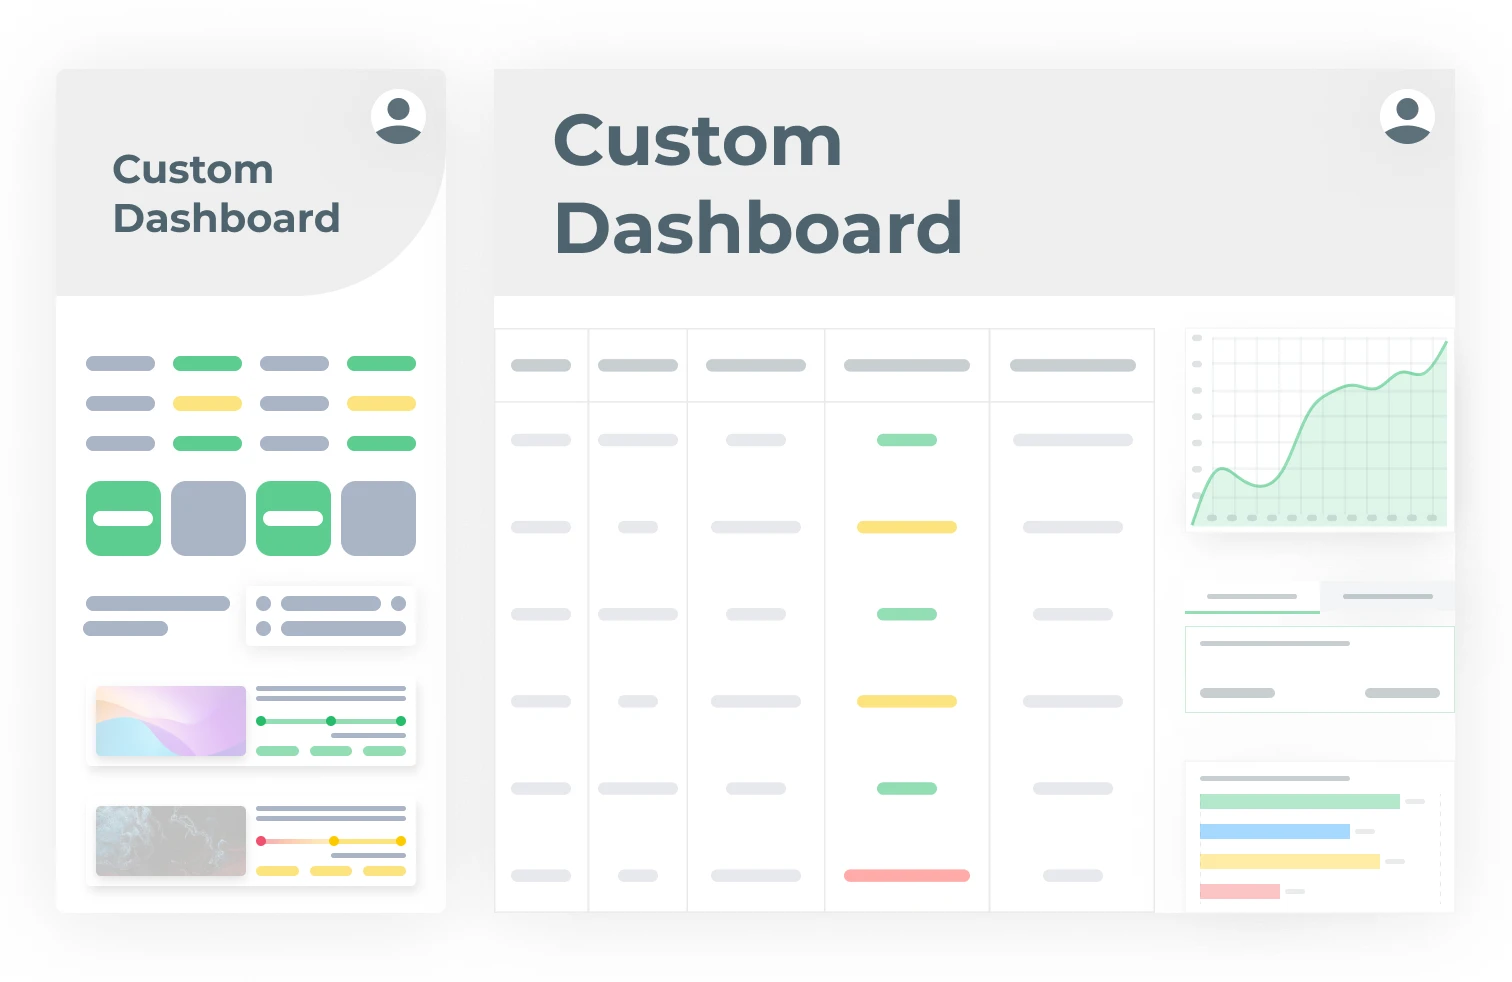 Get started building your custom shipment processing dashboard today